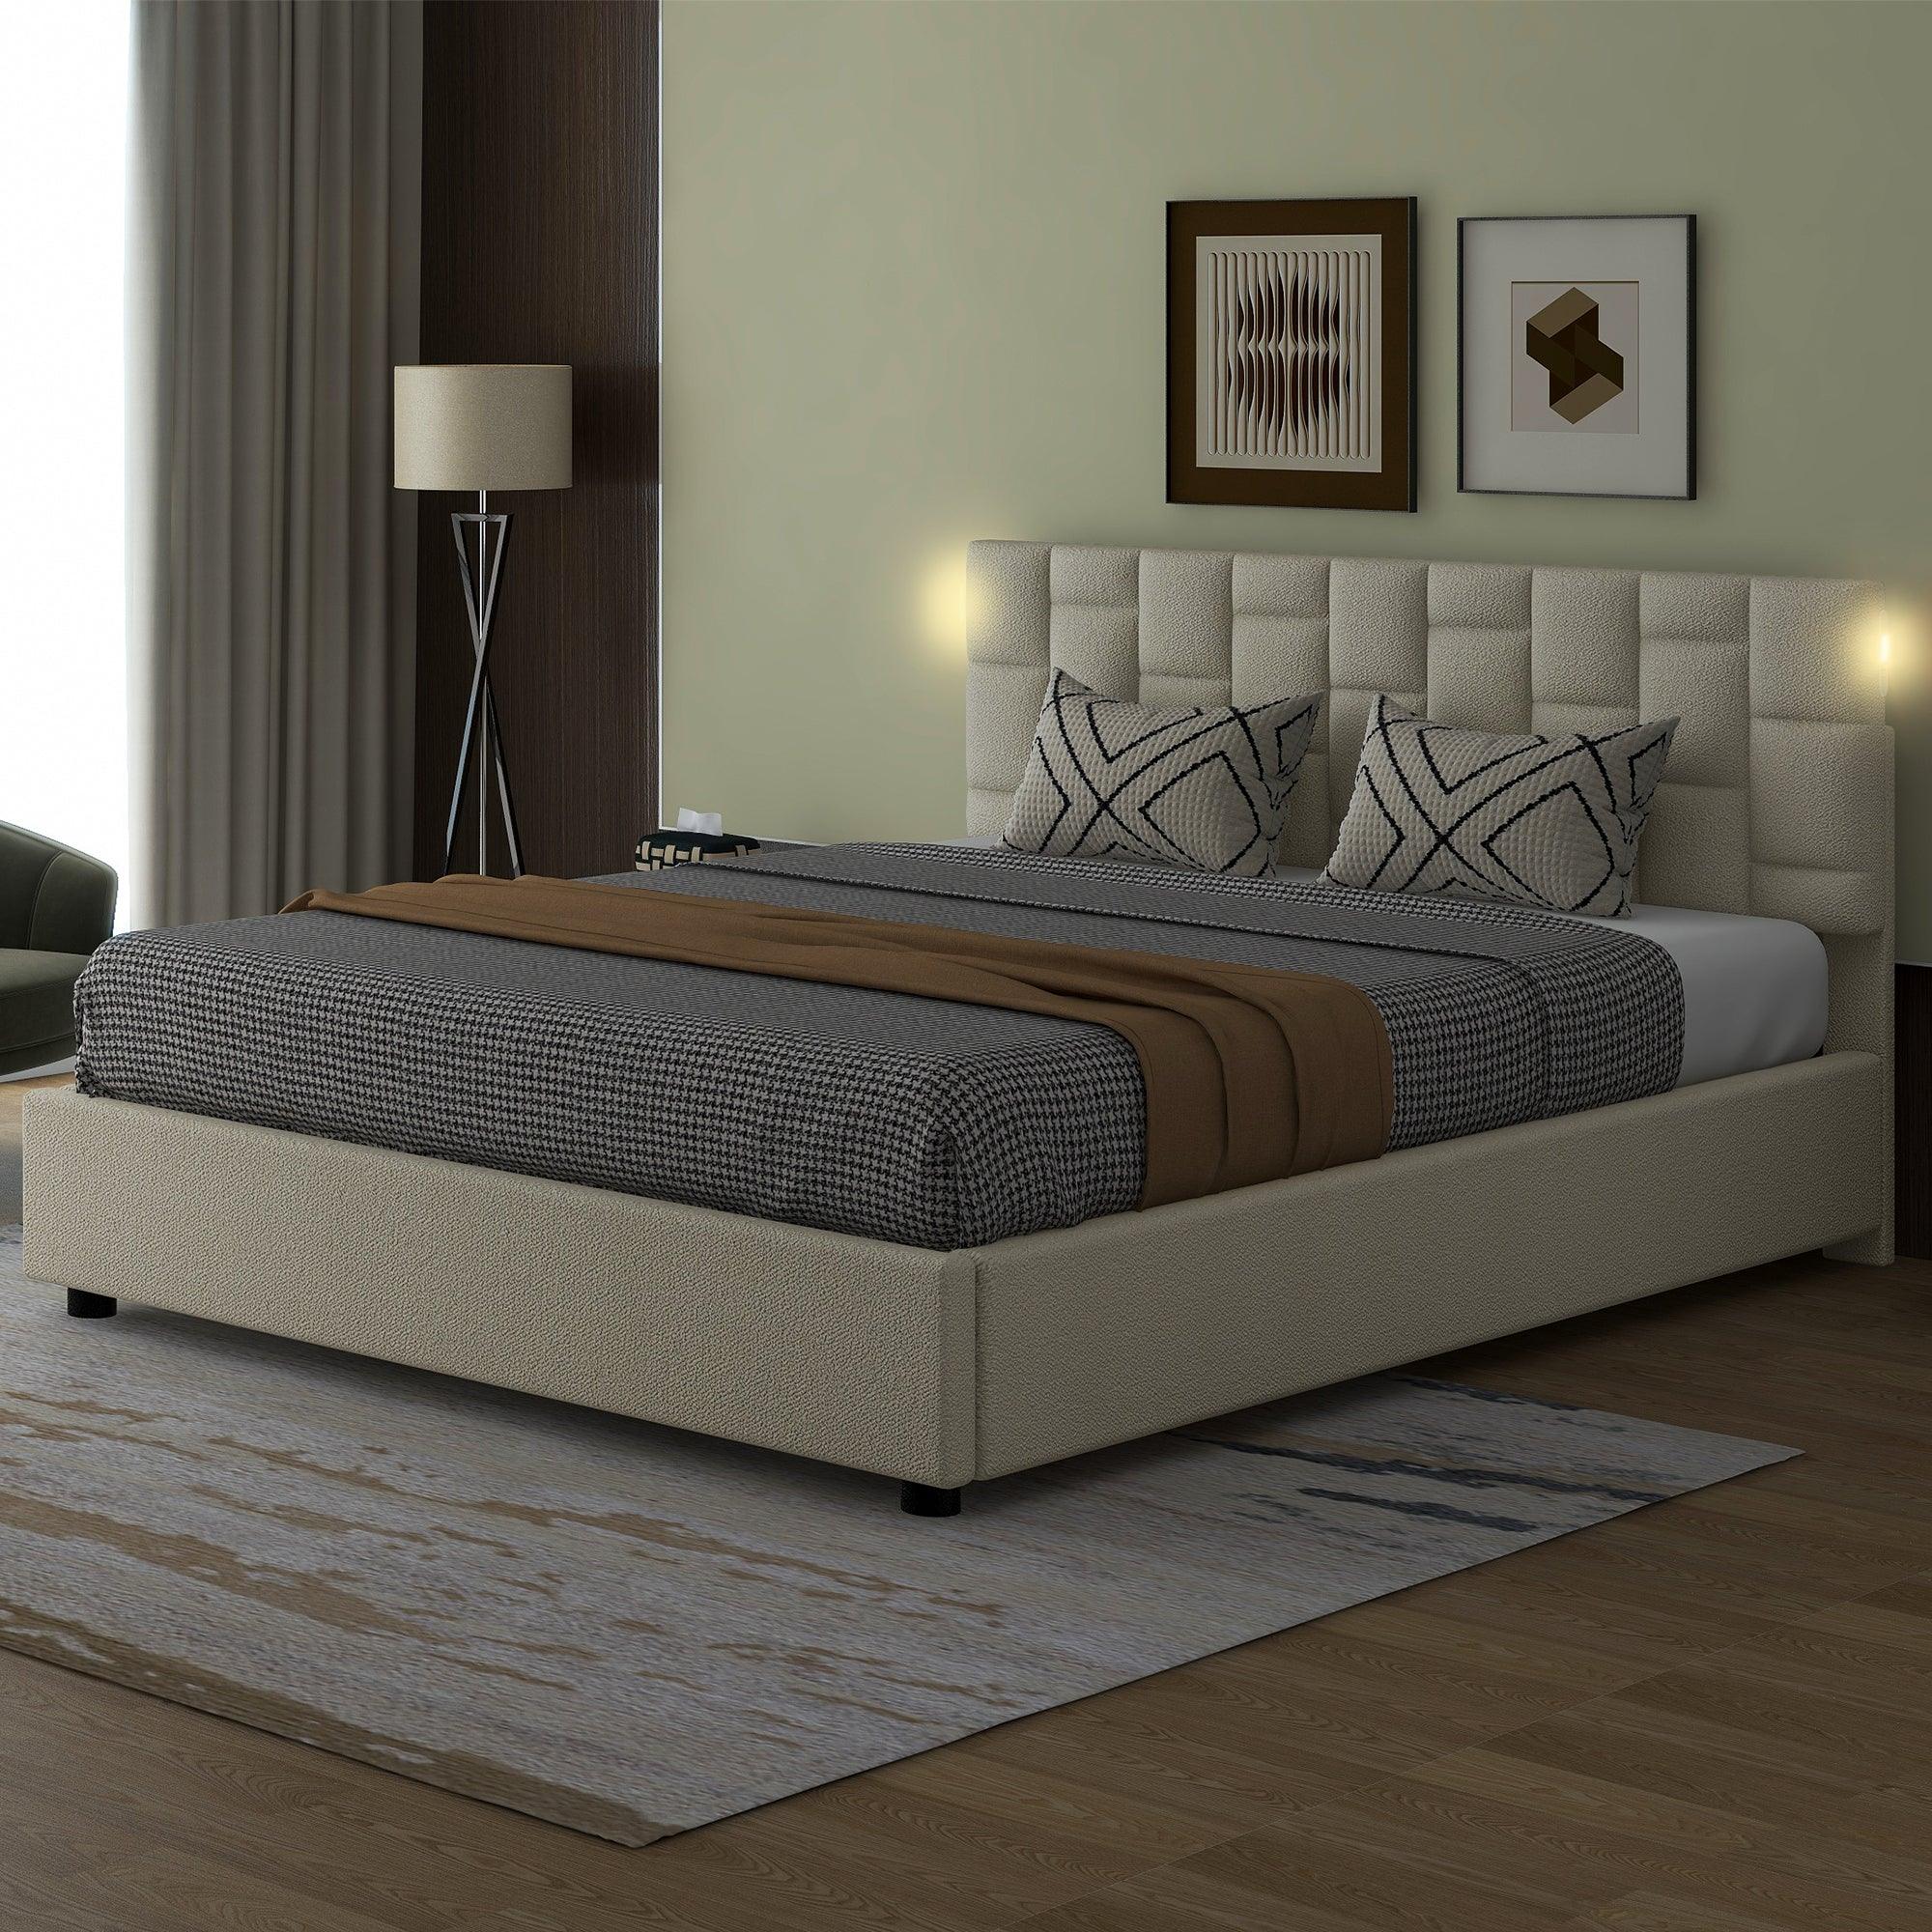 🆓🚛 Queen Size Upholstered Platform bed with Height-adjustable Headboard and Under-bed Storage Space, Beige